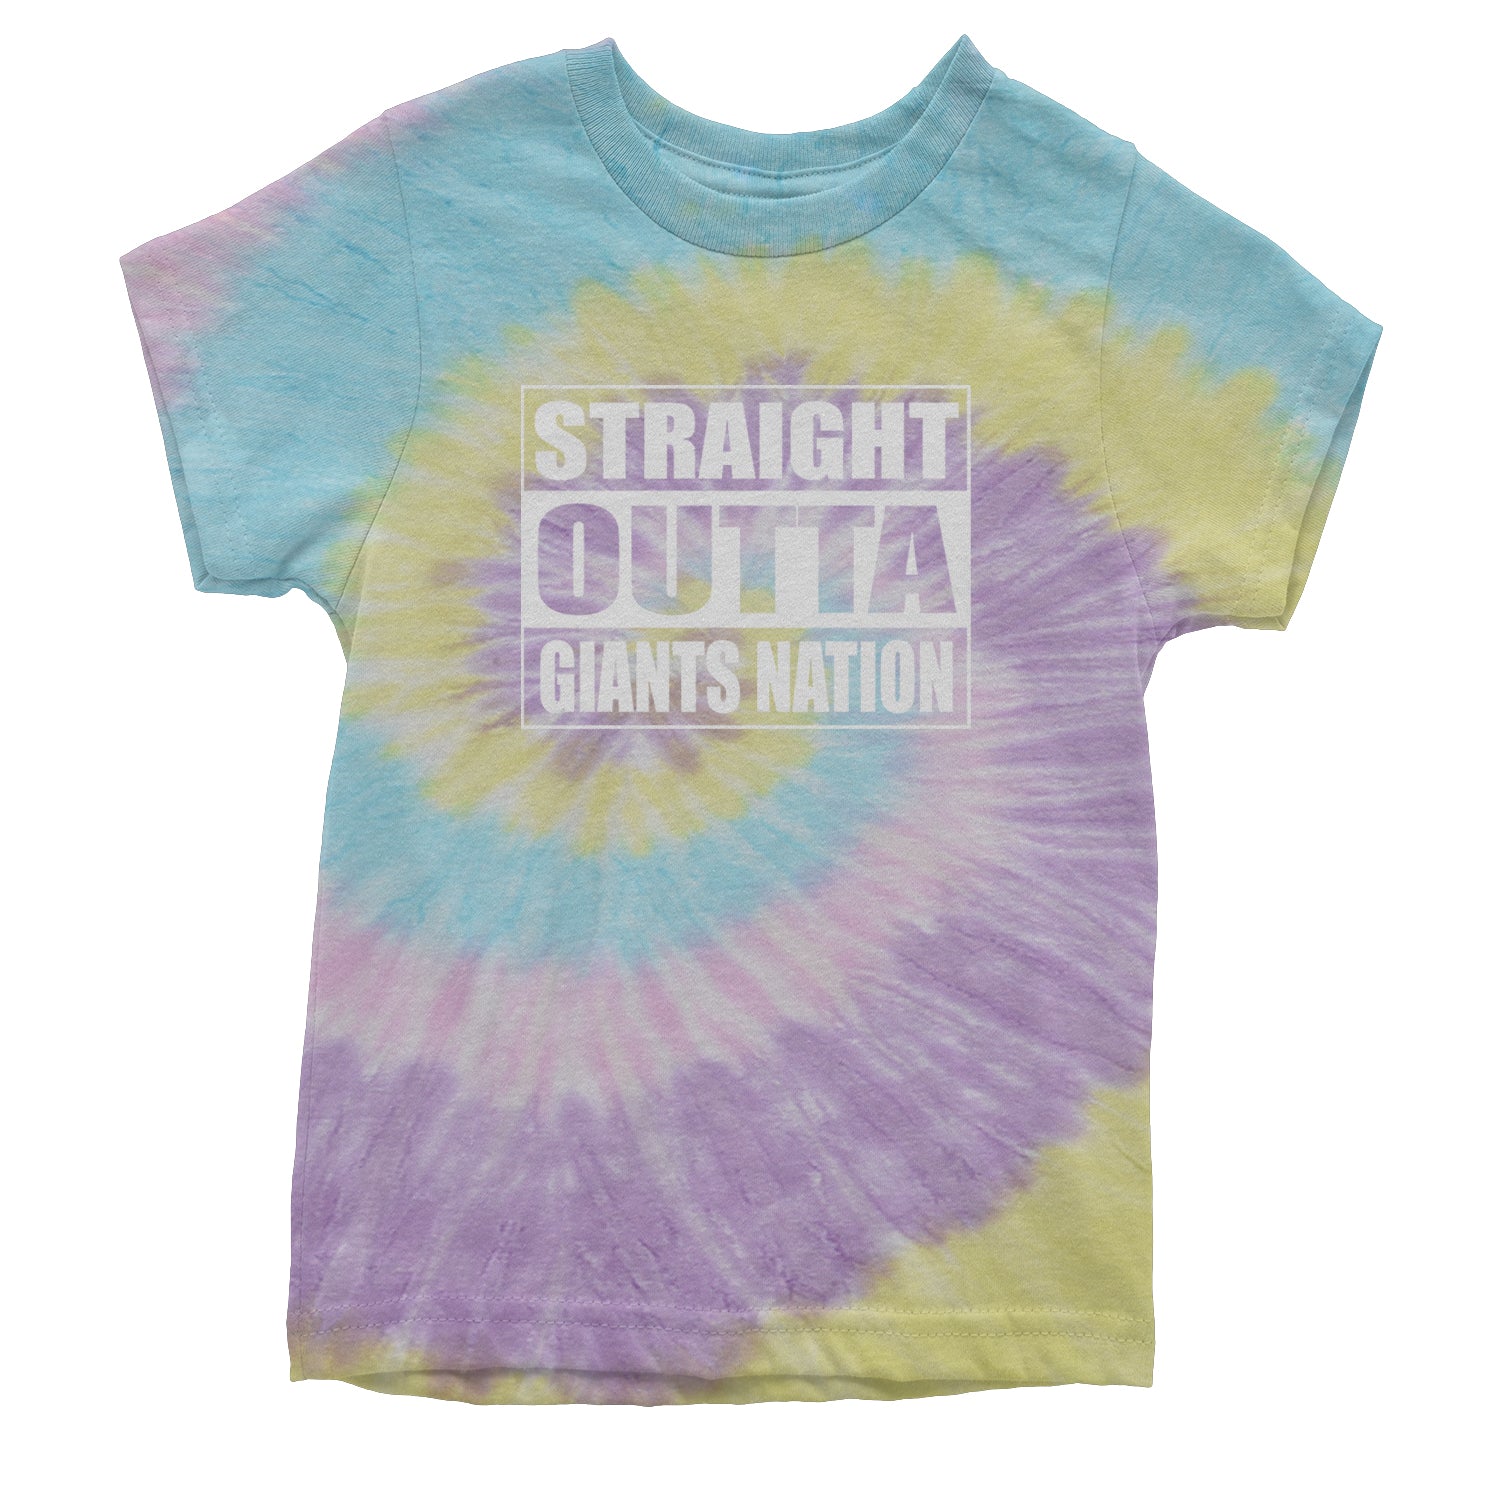 Straight Outta Giants Nation Youth T-shirt bleed, blue, football, giants, new, ny, york by Expression Tees